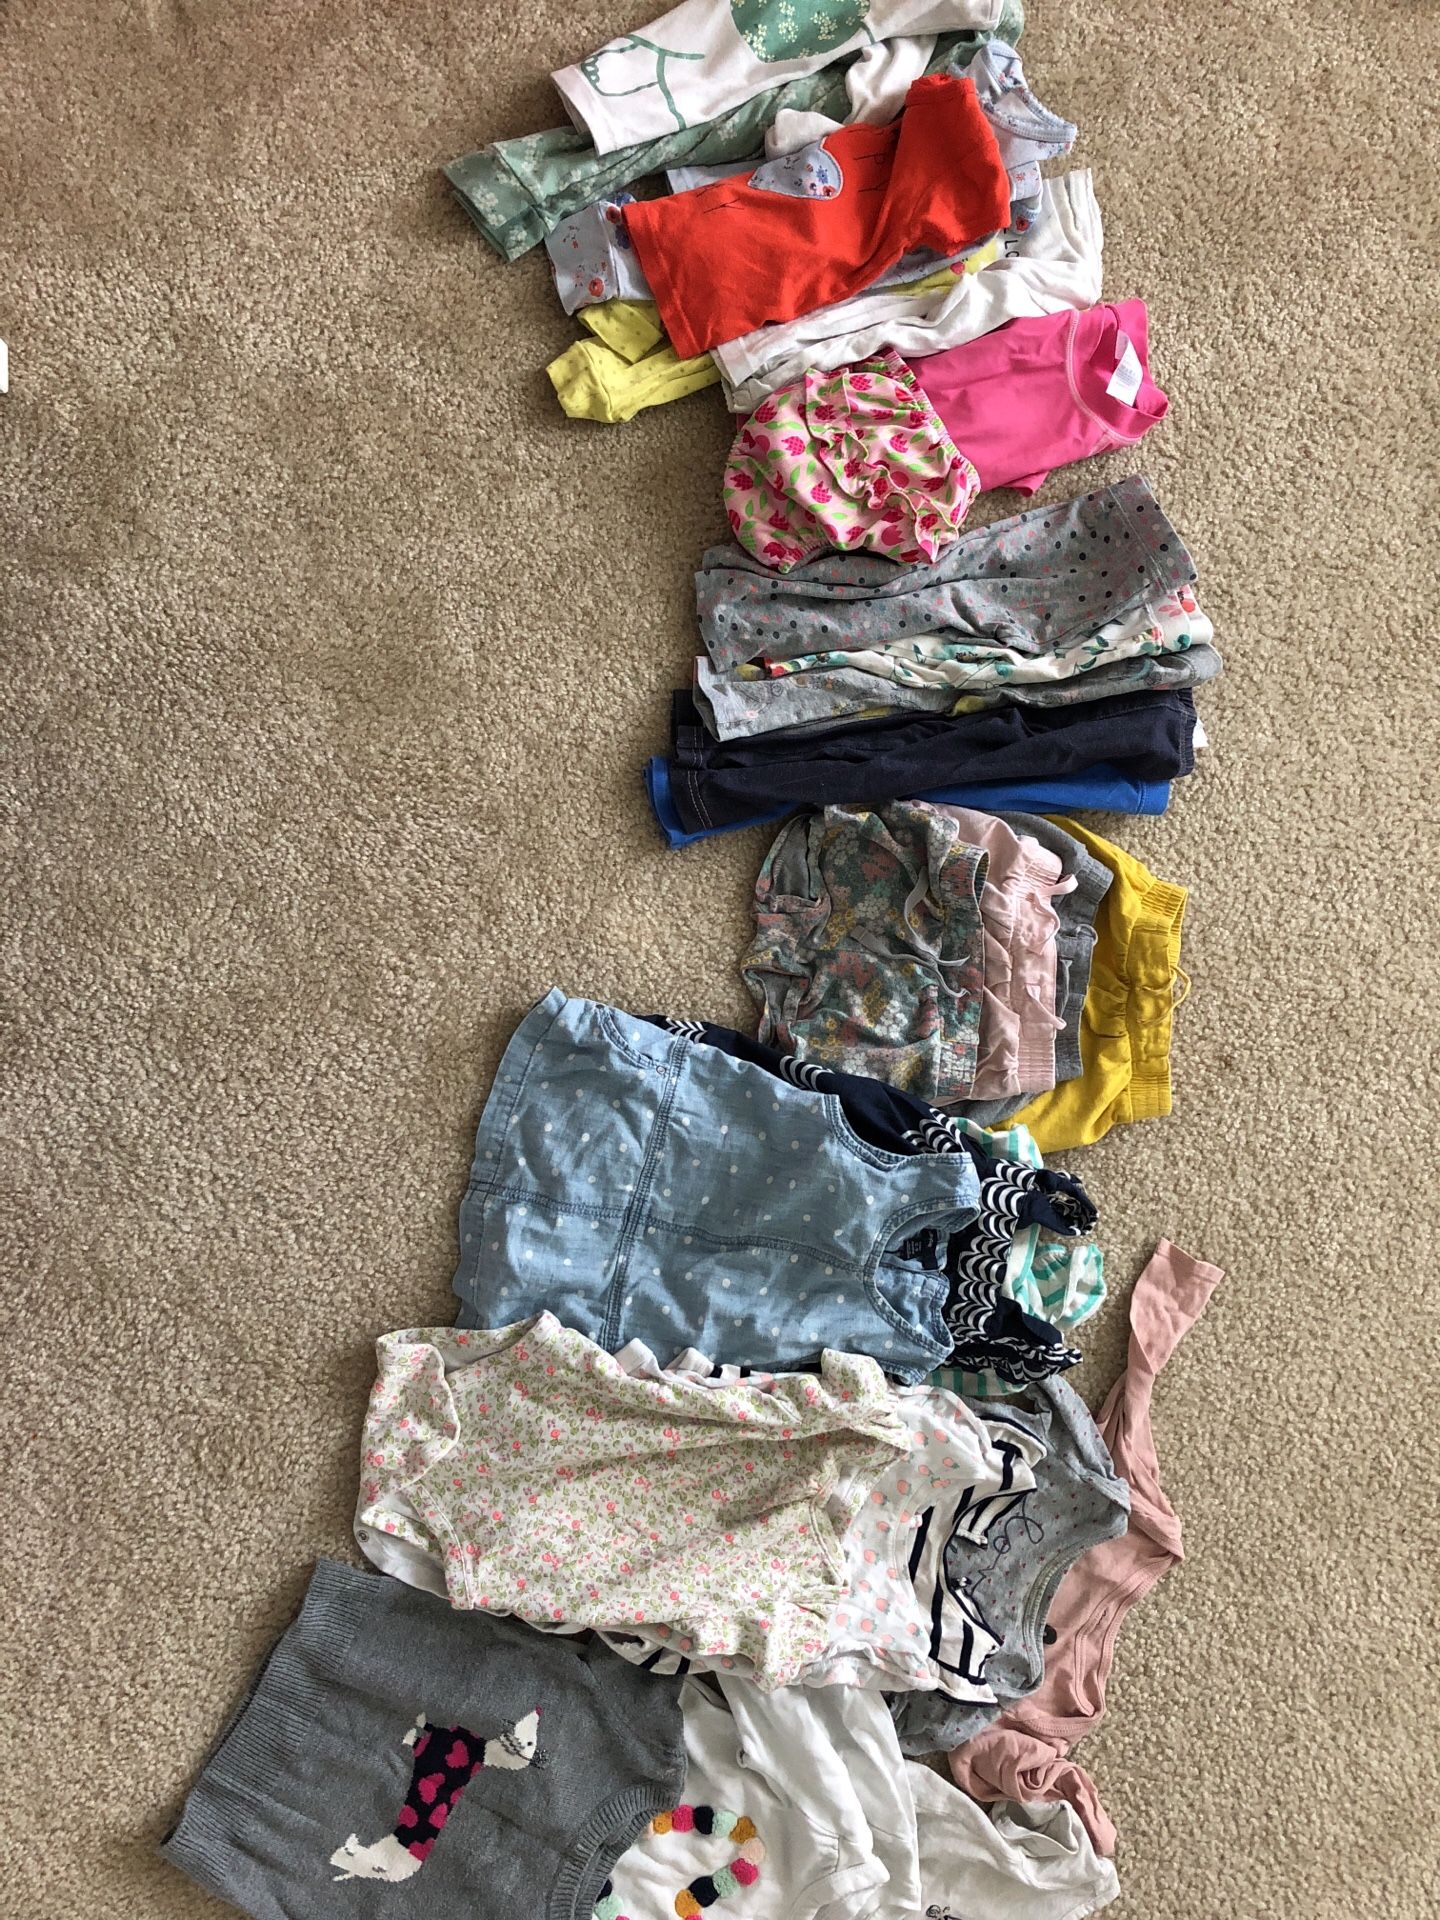 12-18 and 18-24 month baby toddler girl clothes